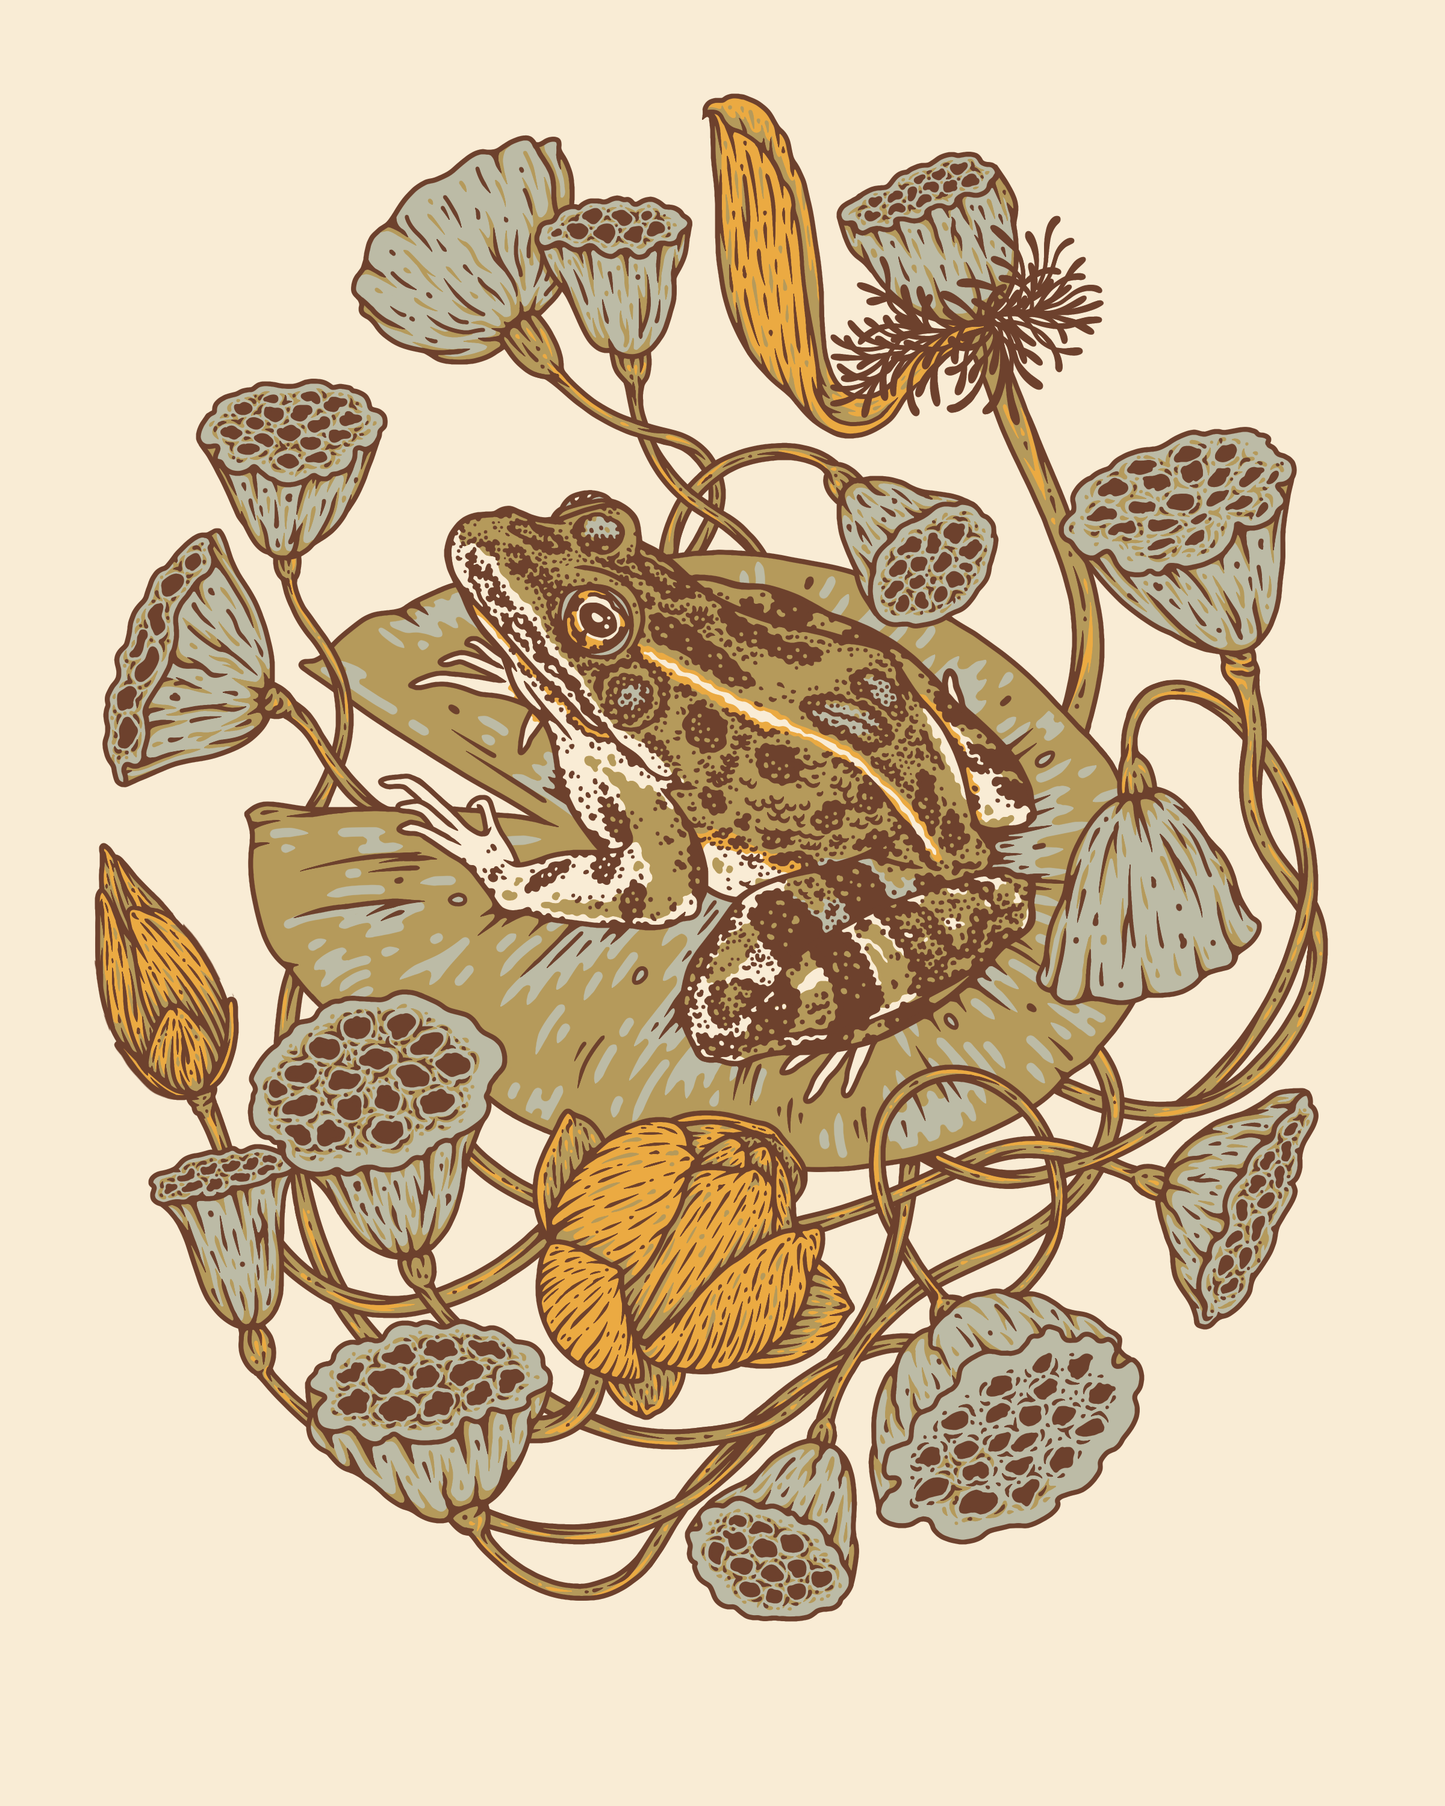 Print - Frog, Lotus Pods, and Lotus Flowers 8x10" Giclee